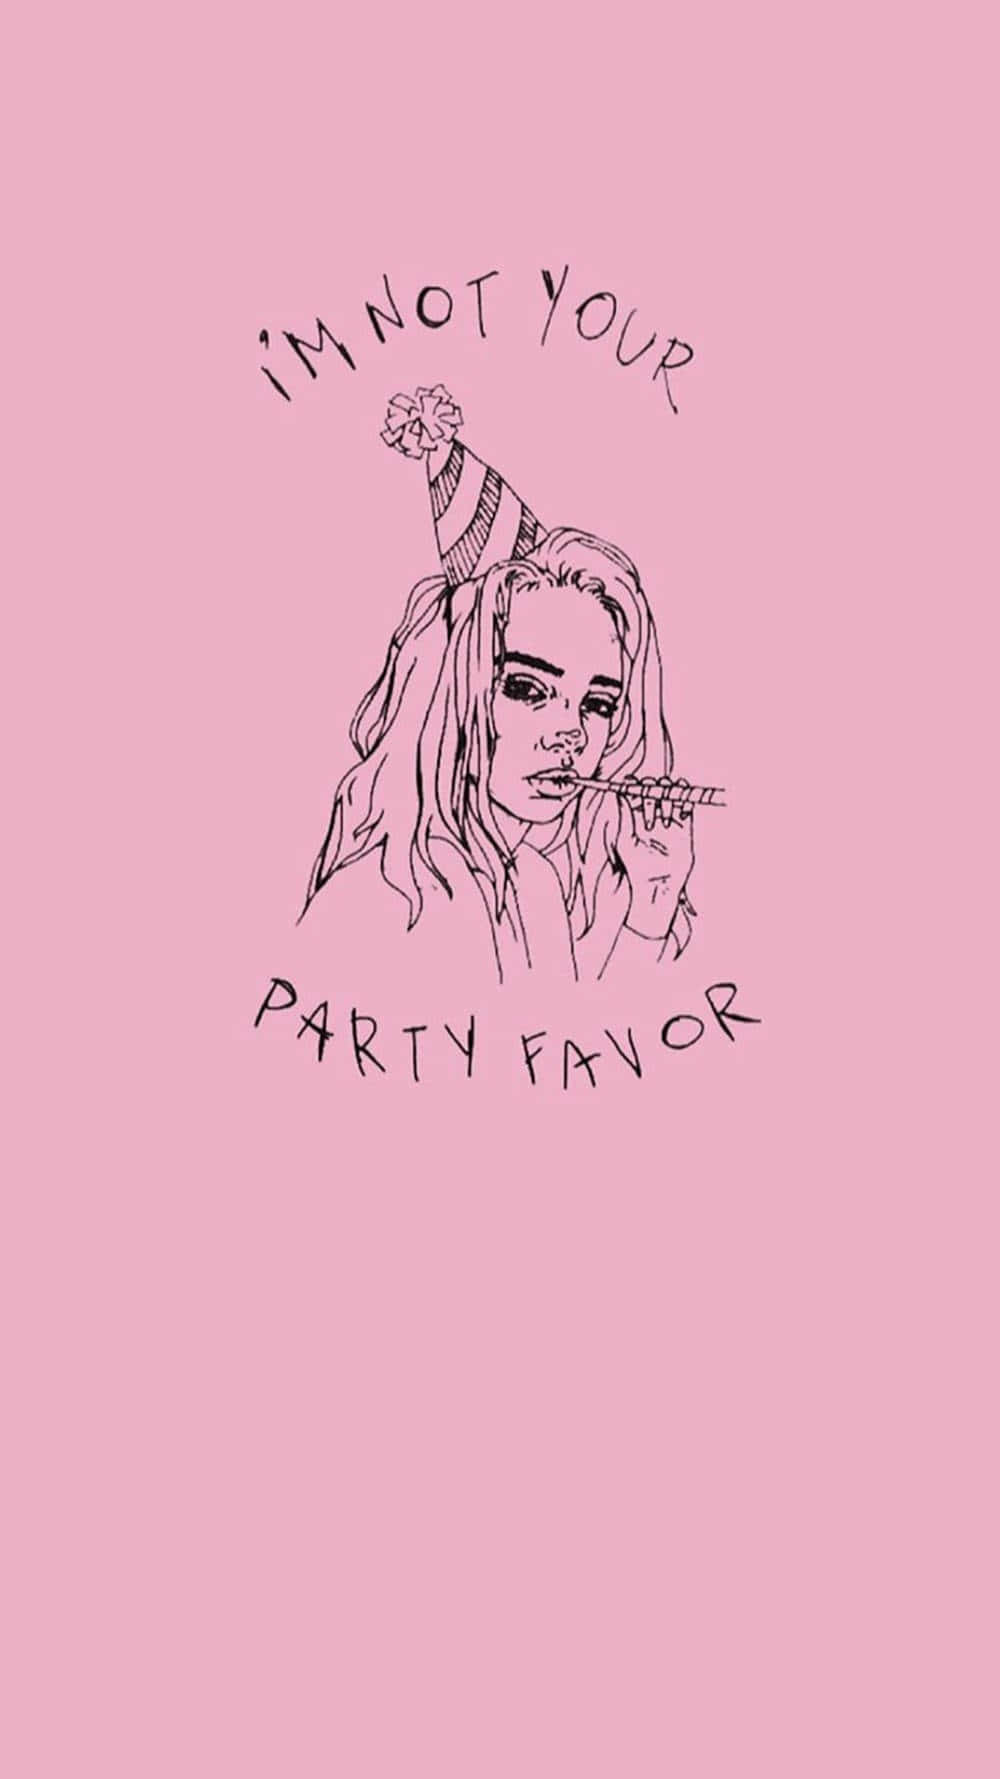 Not Your Party Favor Illustration Wallpaper